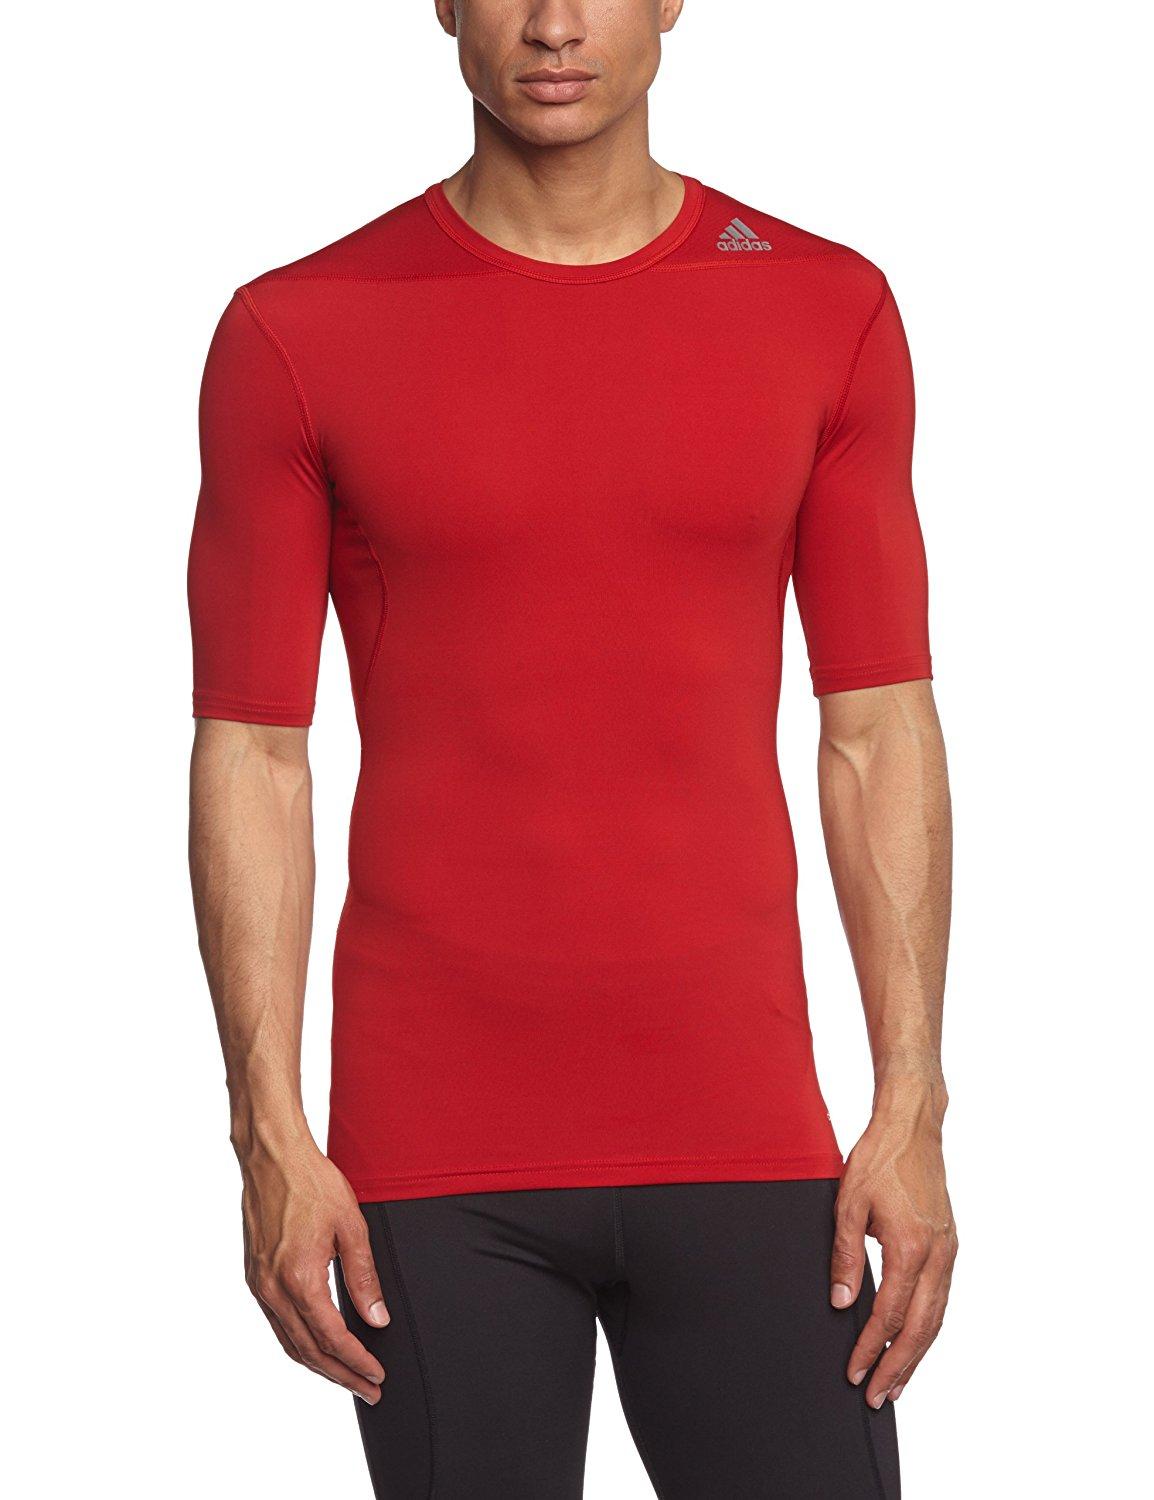 adidas Techfit Compression Top Men's Red New without Tags S - Locker Room  Direct